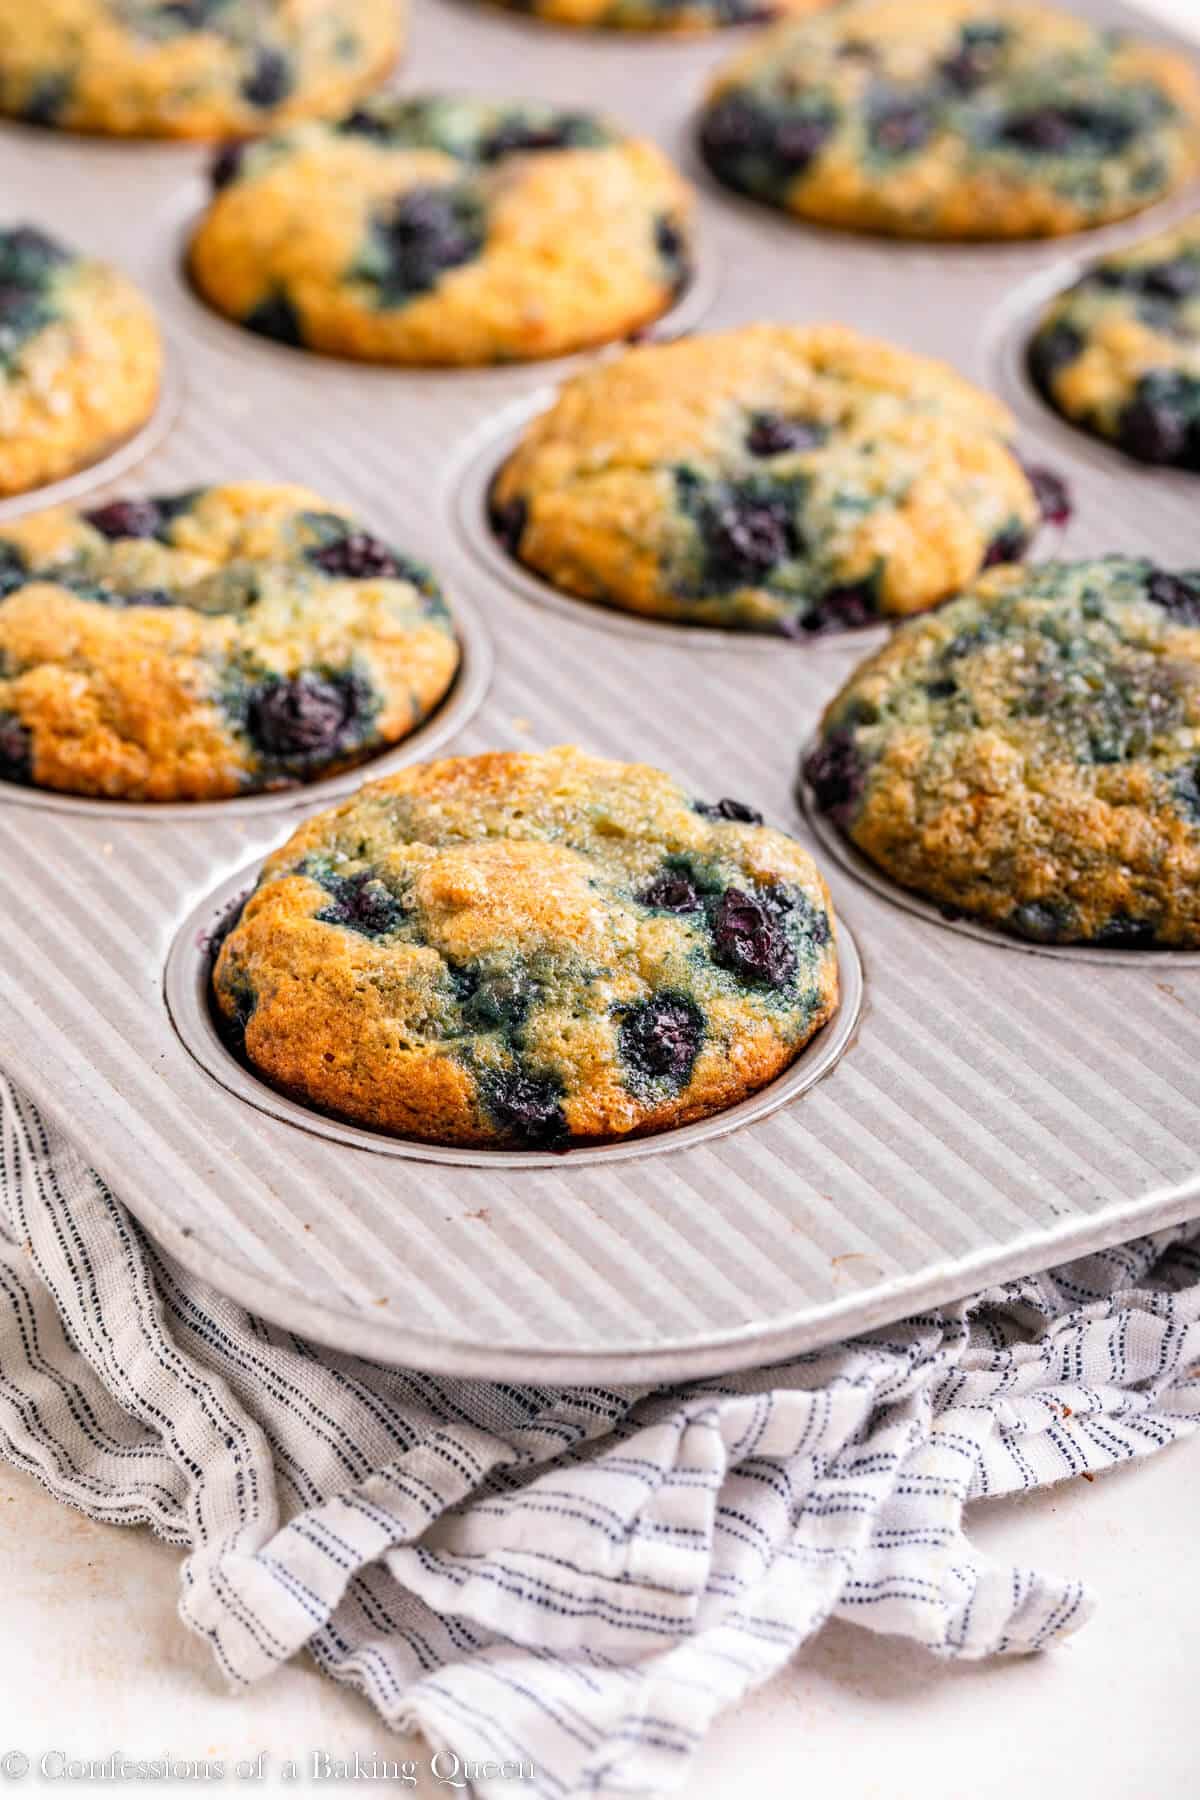 Banana blueberry muffins baked in a muffin tray.